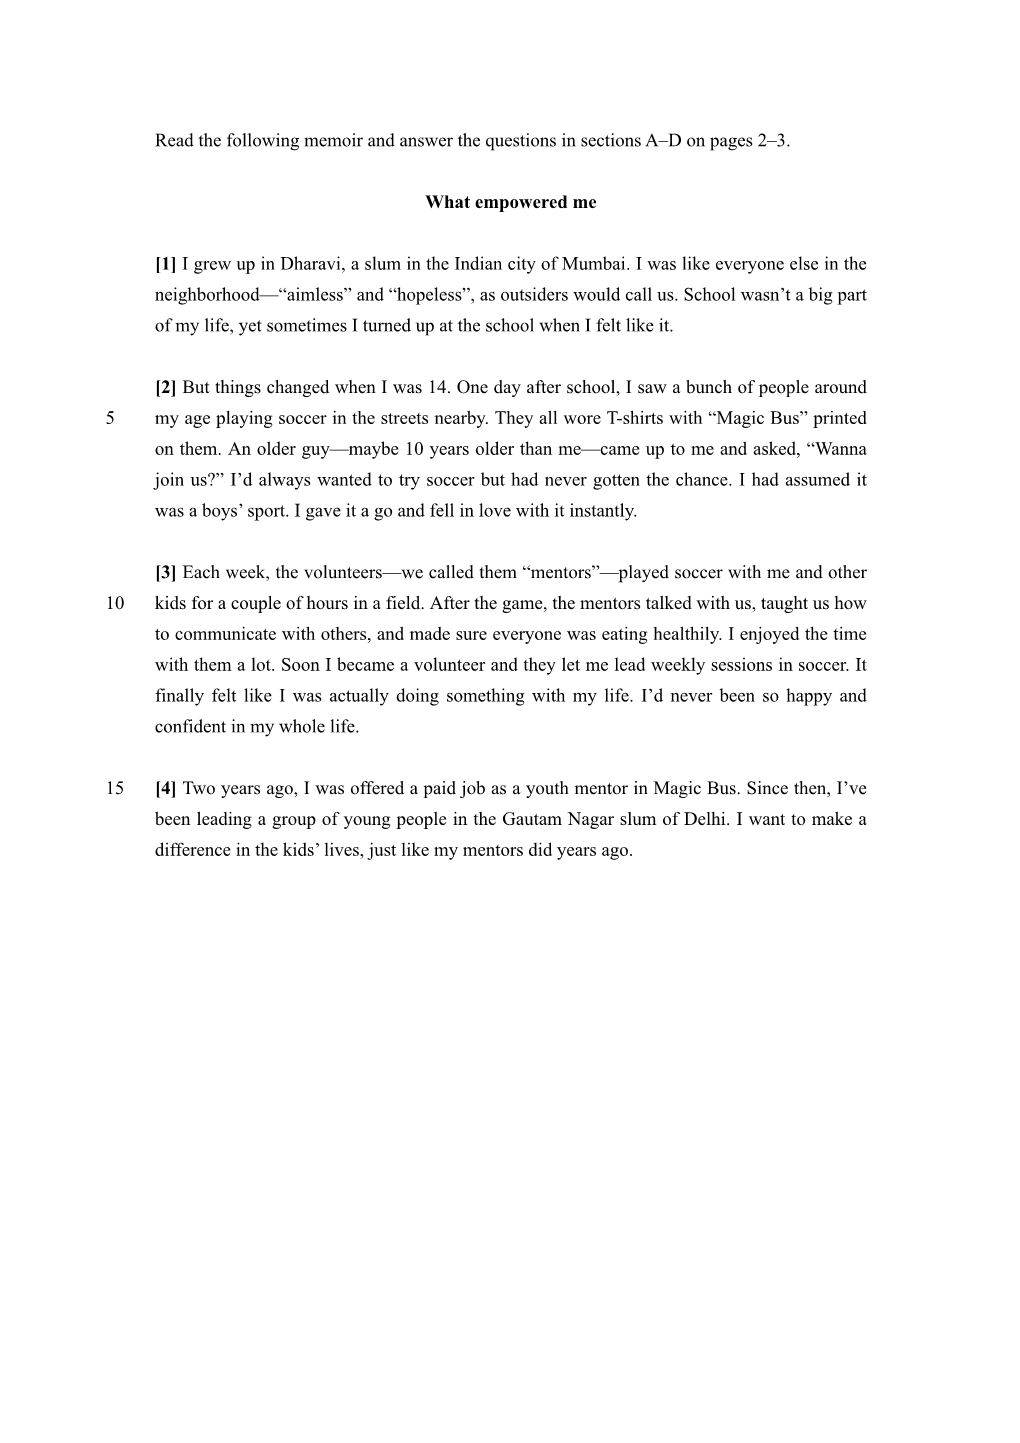 Read the Following Memoir and Answer the Questions in Sections A–D on Pages 2–3